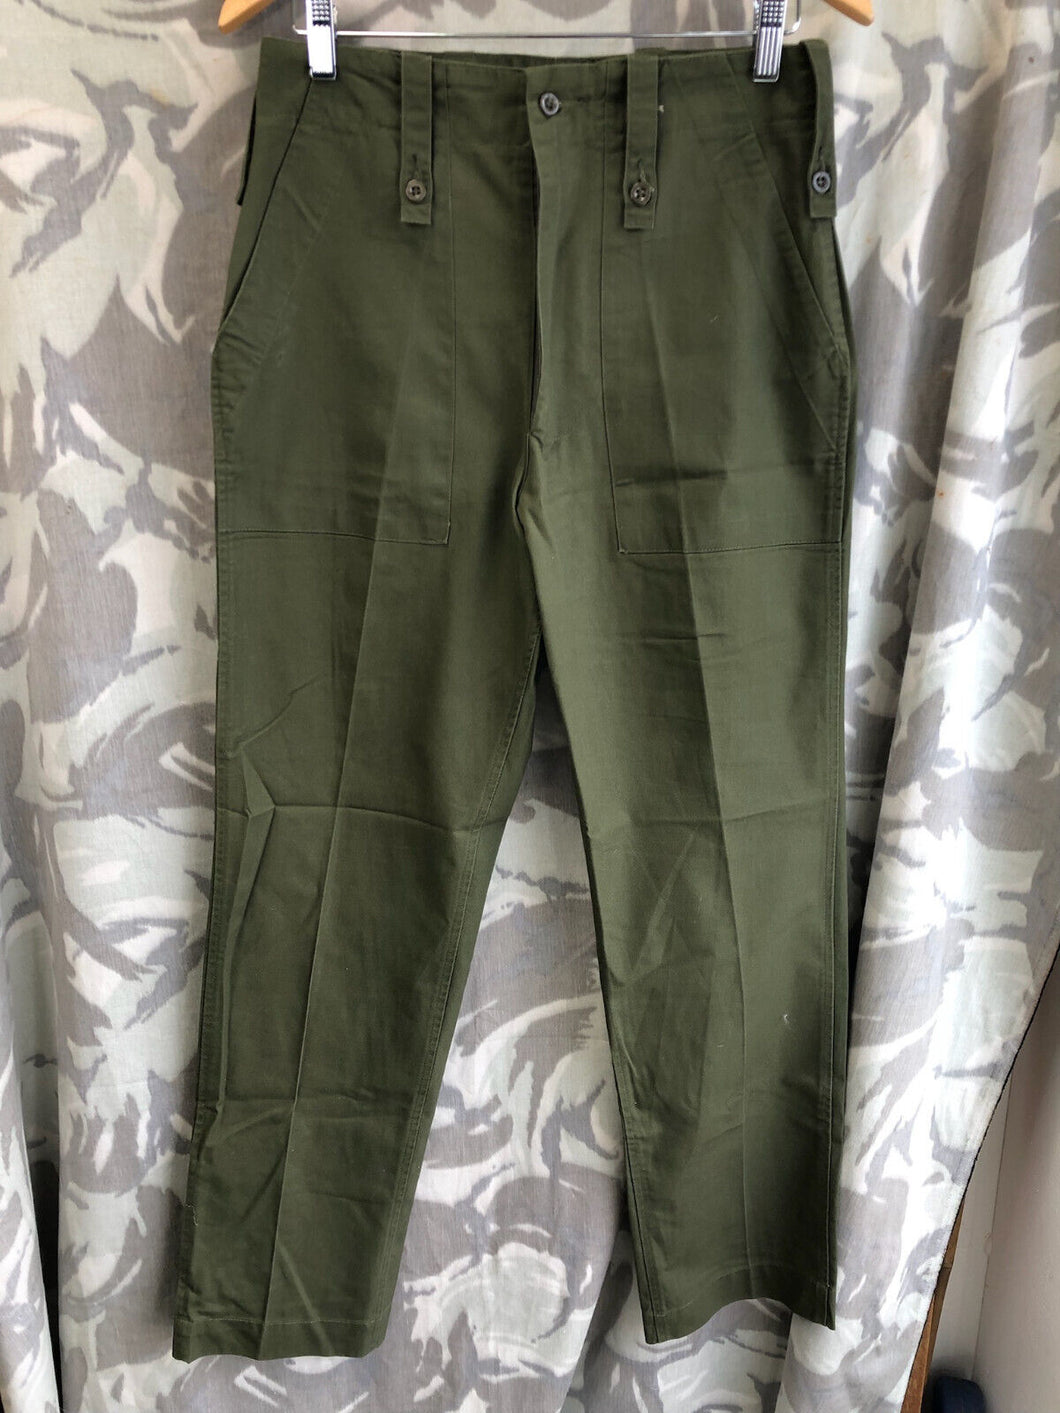 Genuine British Army Olive Green Lightweight Fatigue Combat Trousers - 75/76/92